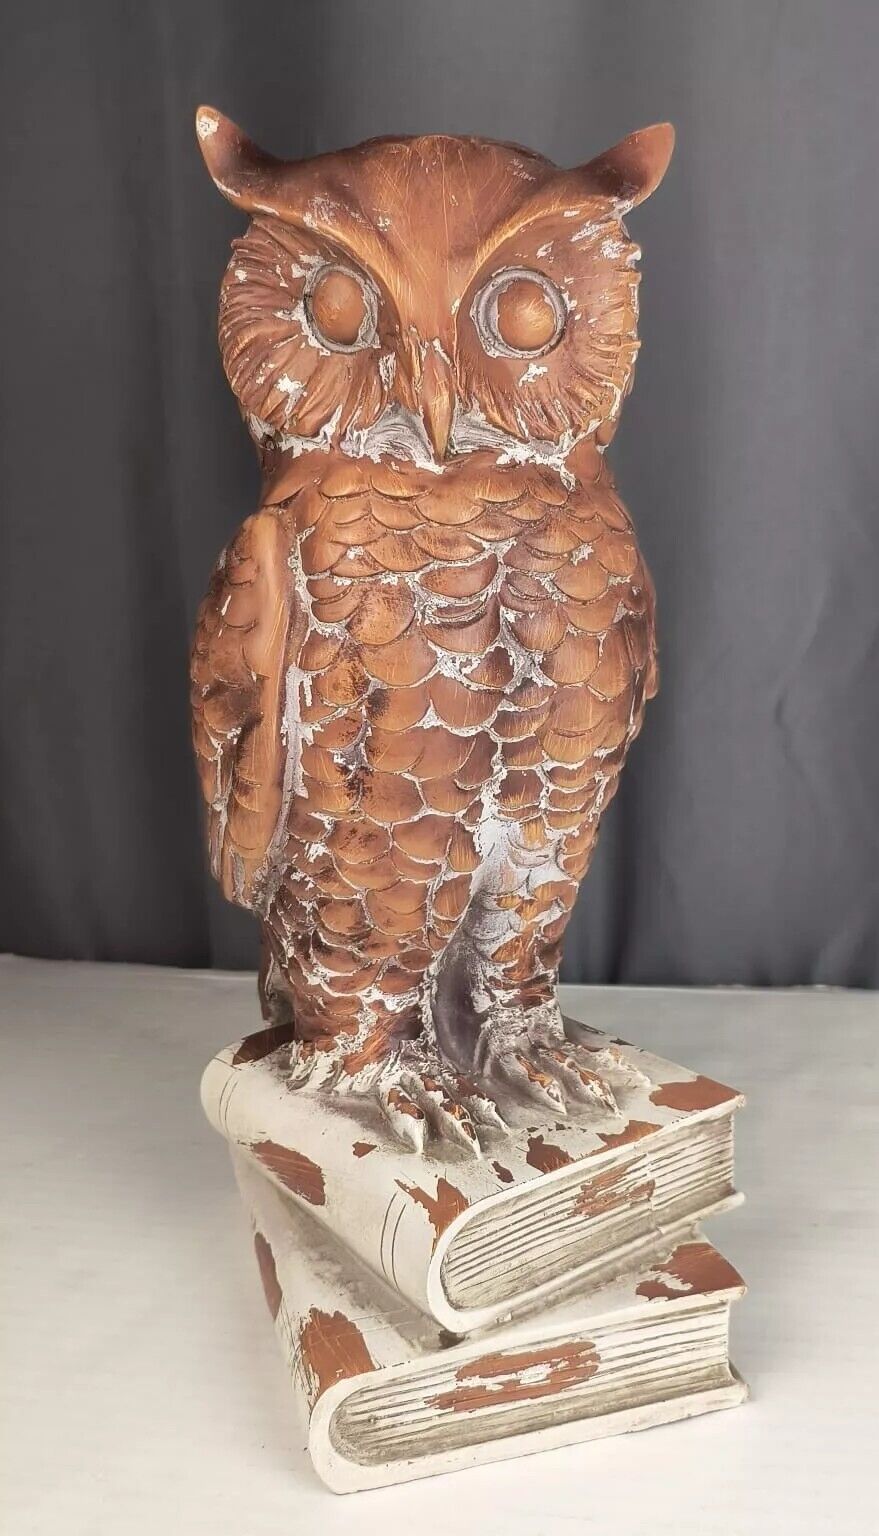 Owl Antique Style Finish Resin Standing On Books Cottagecore Old Money Core